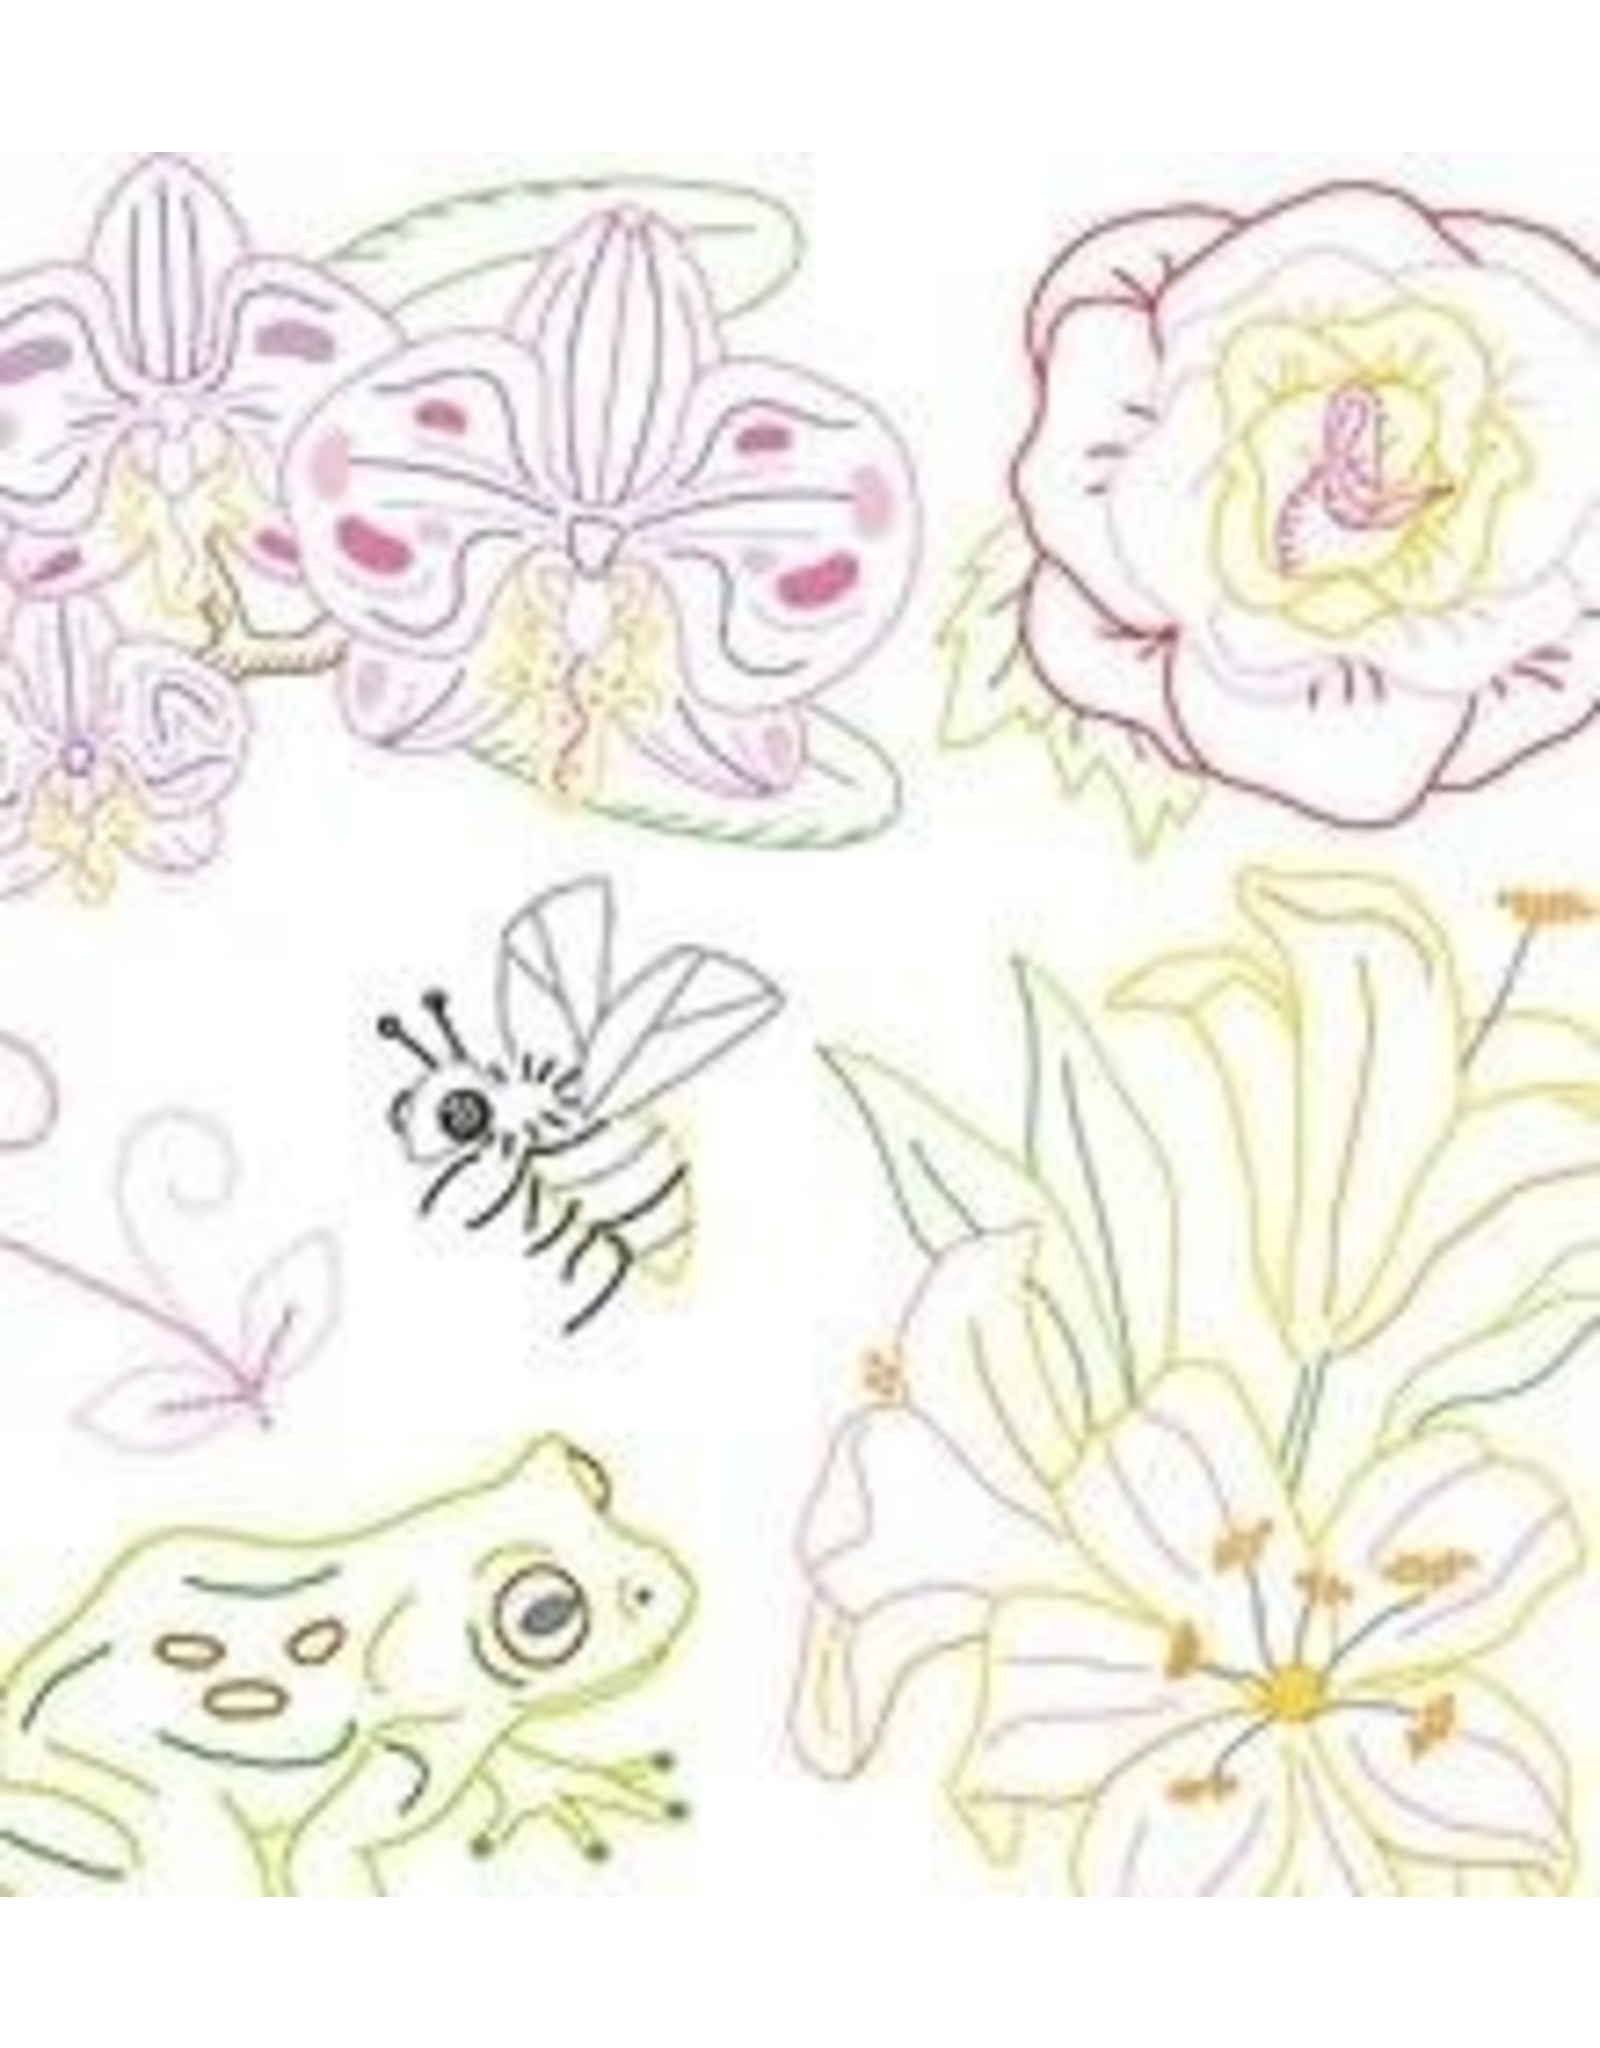 Sublime Stitching Embroidery Iron-On Transfers, Little Blooms